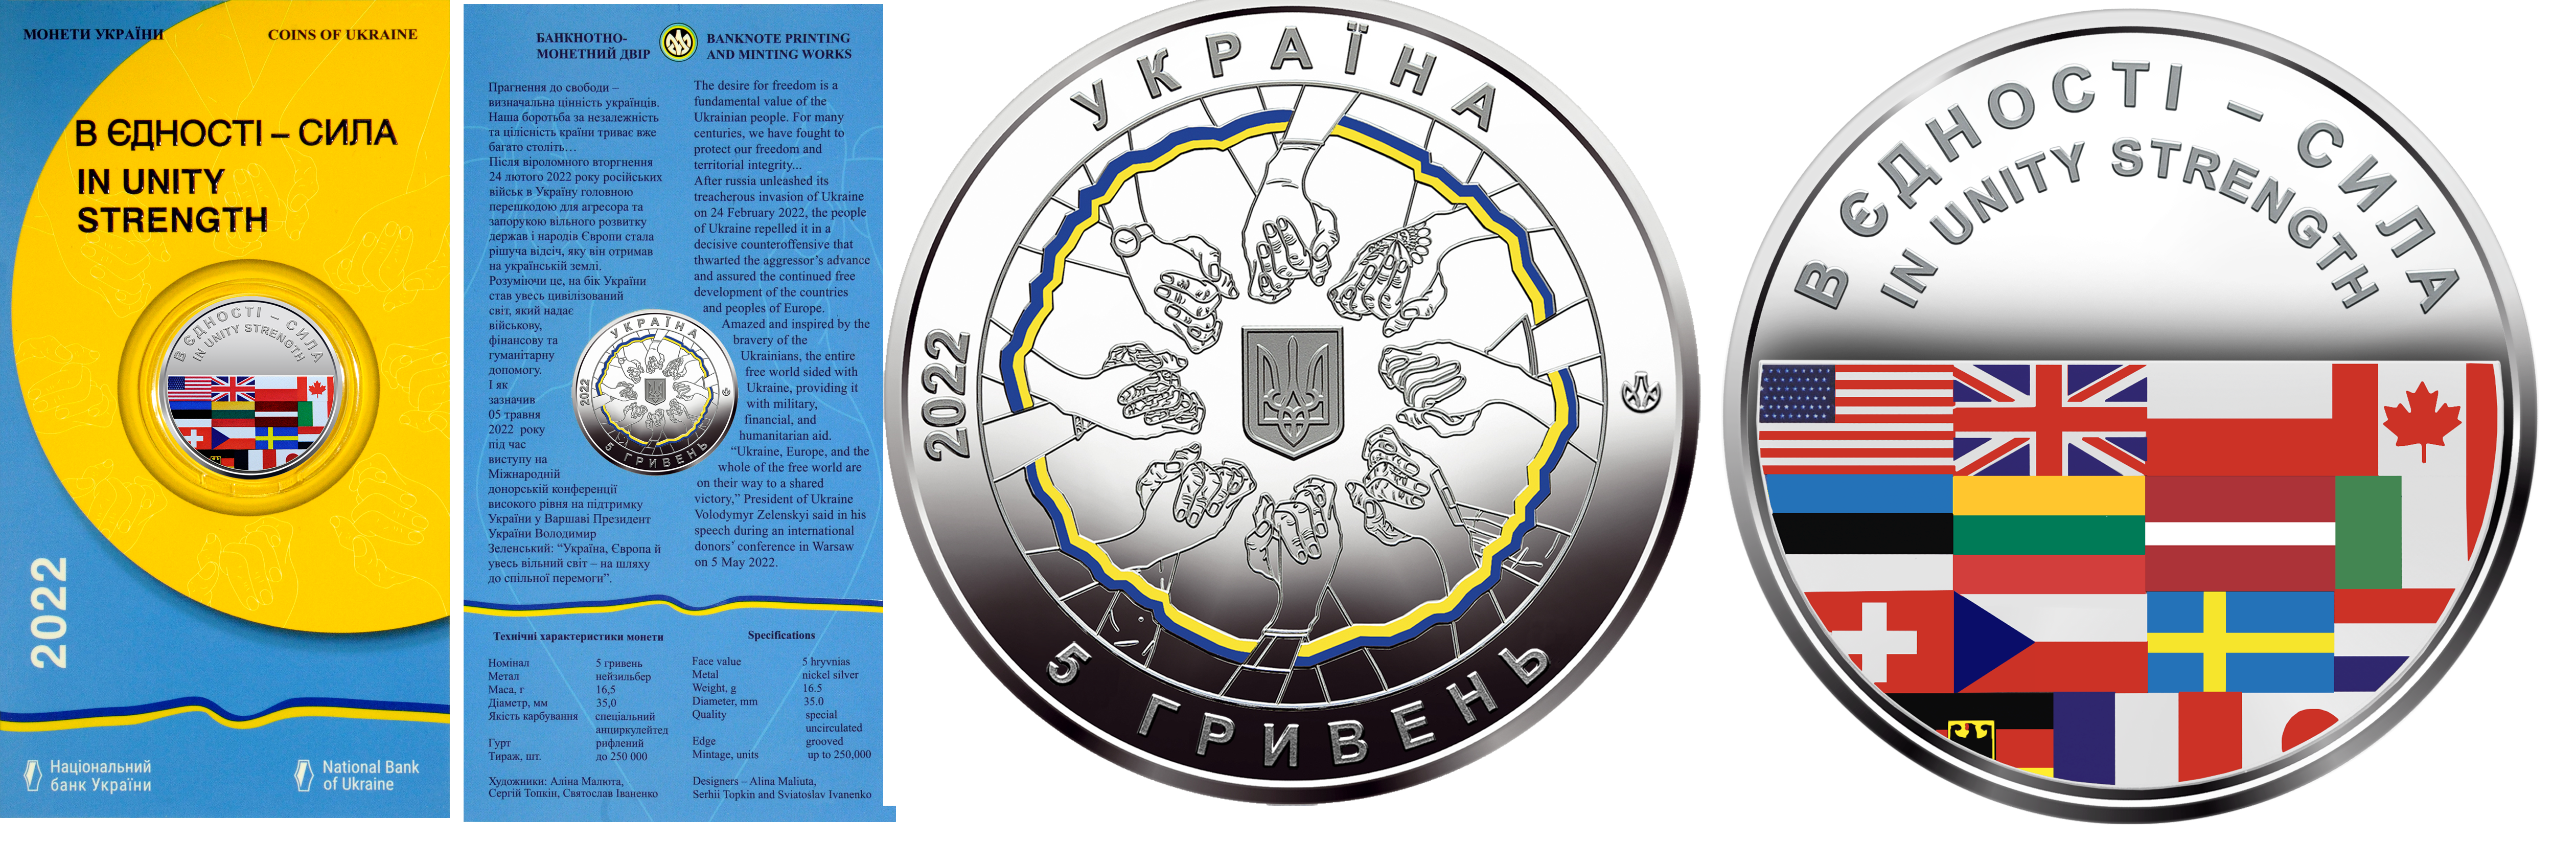 Sale of commemorative coins from MTB BANK • buy commemorative coins in Ukraine at MTB BANK - photo 8 - mtb.ua